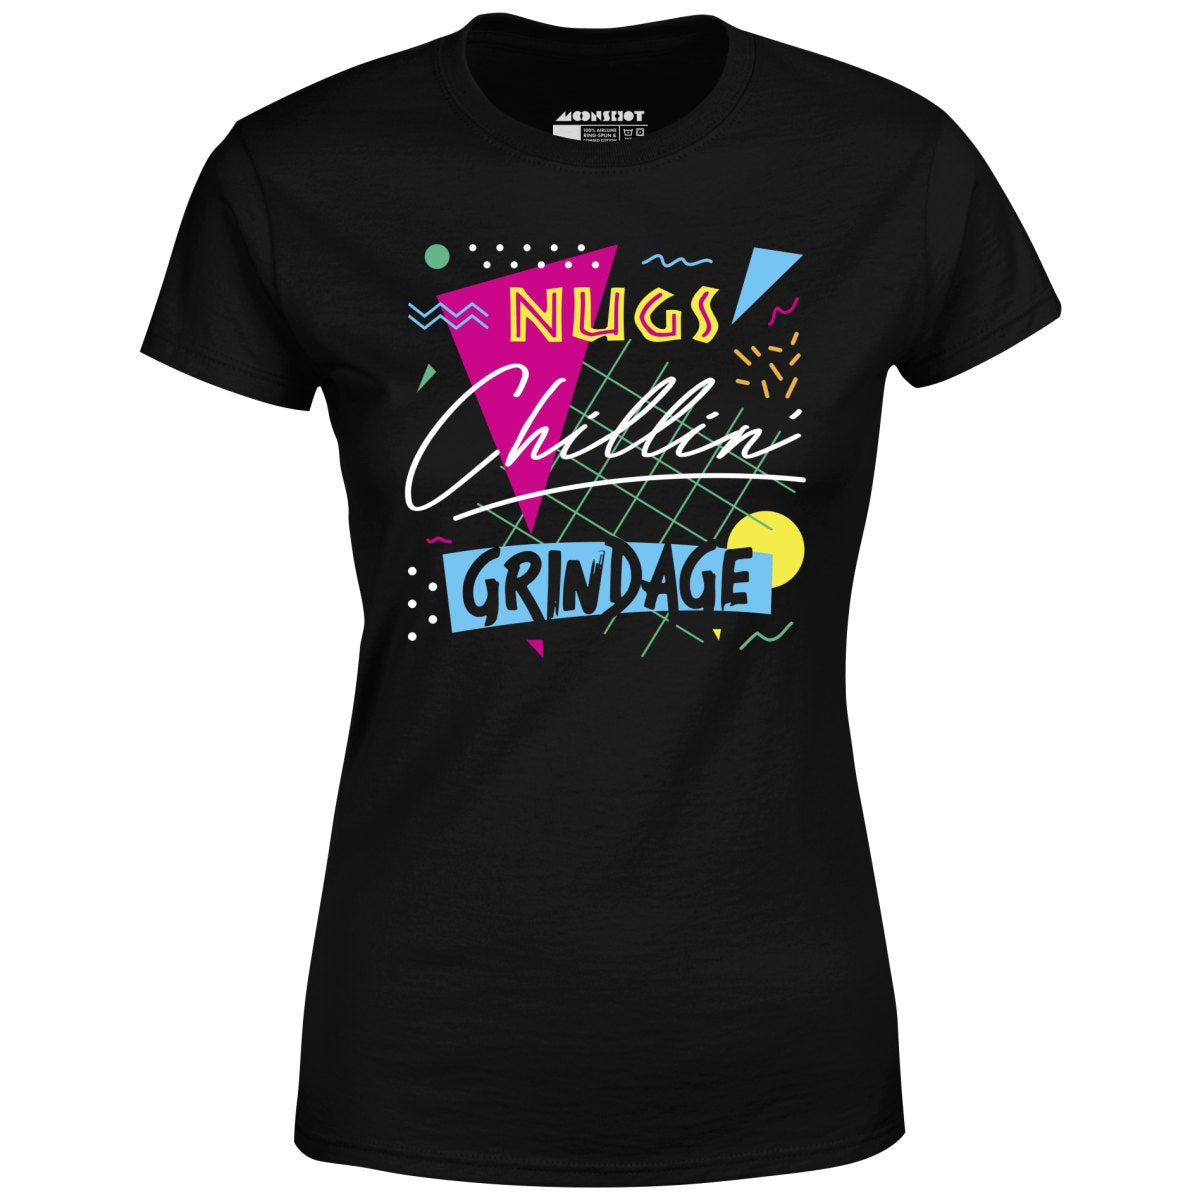 Nugs, Chillin', and Grindage - Women's T-Shirt